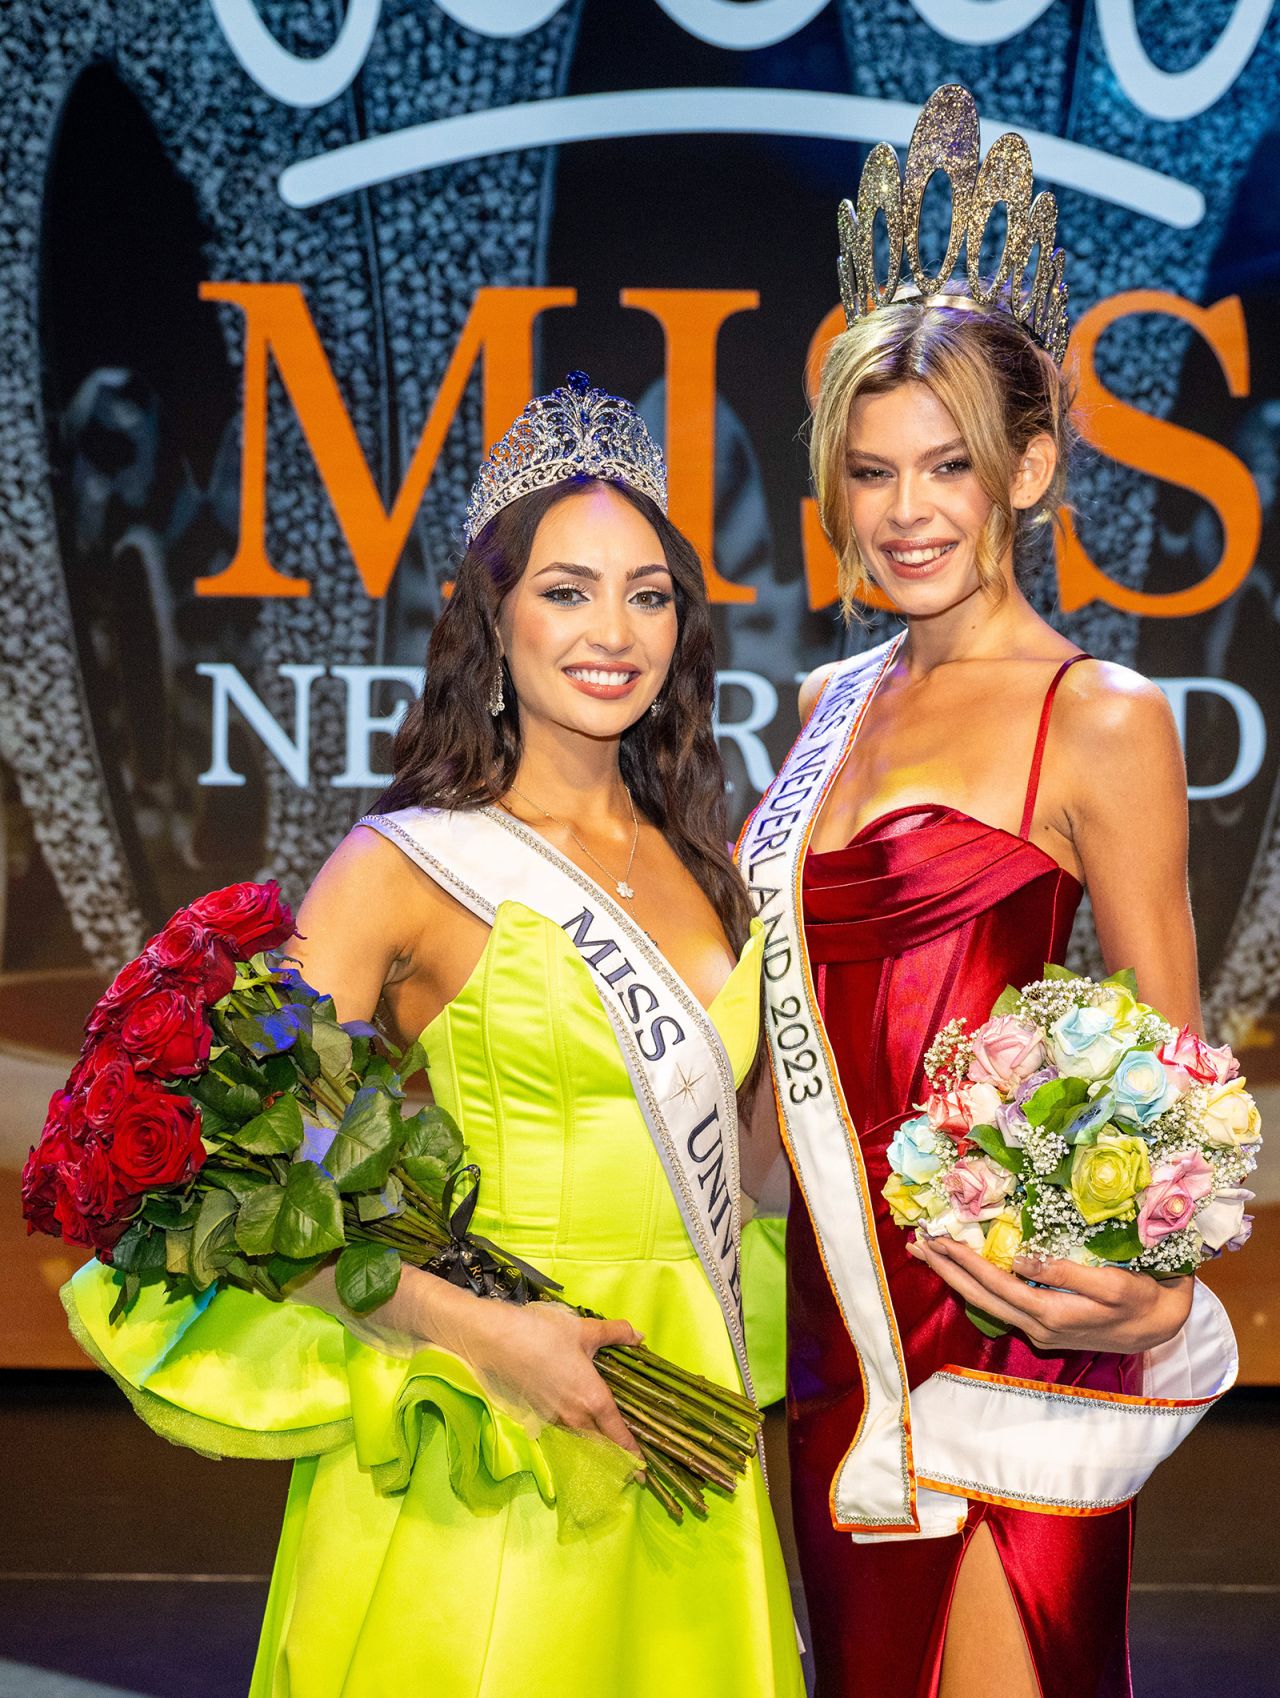 Point de Vue Out
Mandatory Credit: Photo by Shutterstock (14003250c)
R'Bonney Gabriel (Miss Universe 2022) and Rikkie Kolle (Miss Netherlands 2023) at the final of Miss Netherlands 2023 in the AFAS Theater in Leusden.
Final of Miss Netherlands, Leusden - 08 Jul 2023